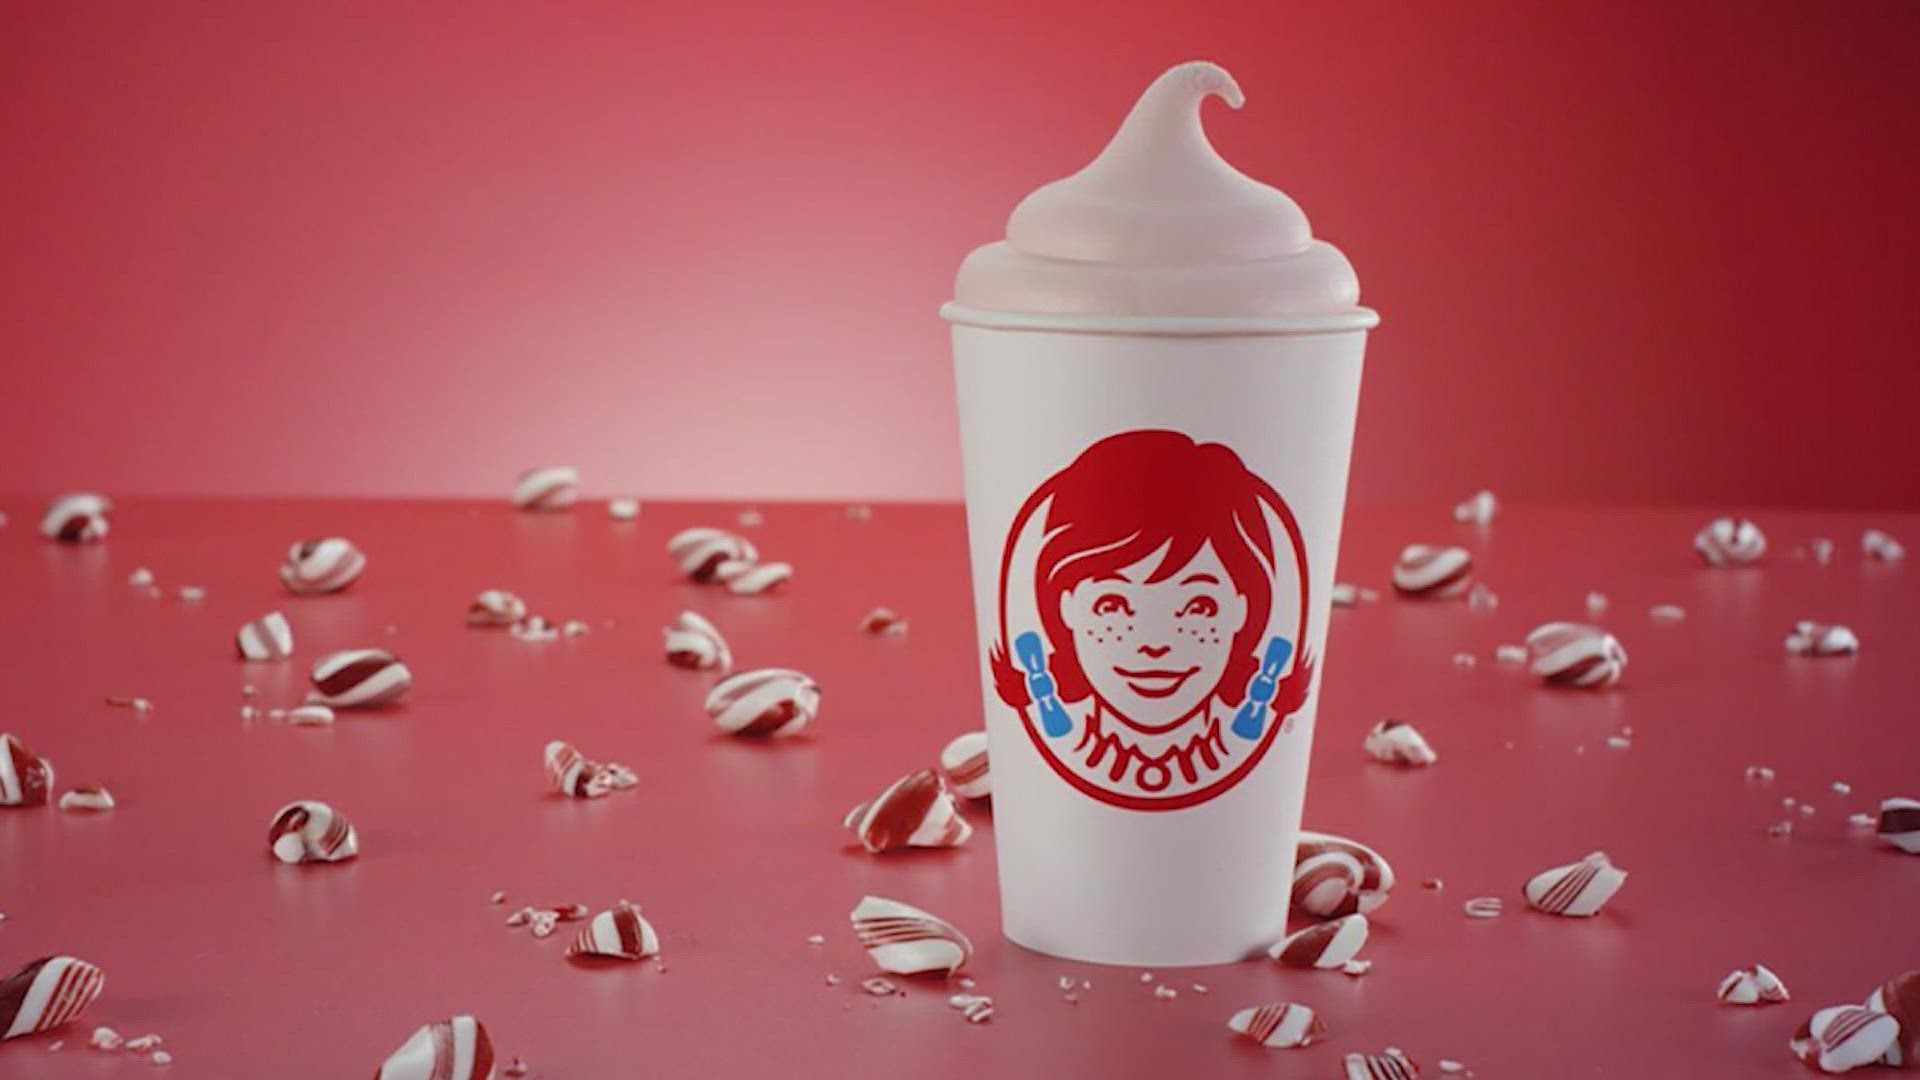 A merry take on the legendary treat, Wendy's Peppermint Frosty is joining the classic Chocolate Frosty on menus for the 2022 holiday season.